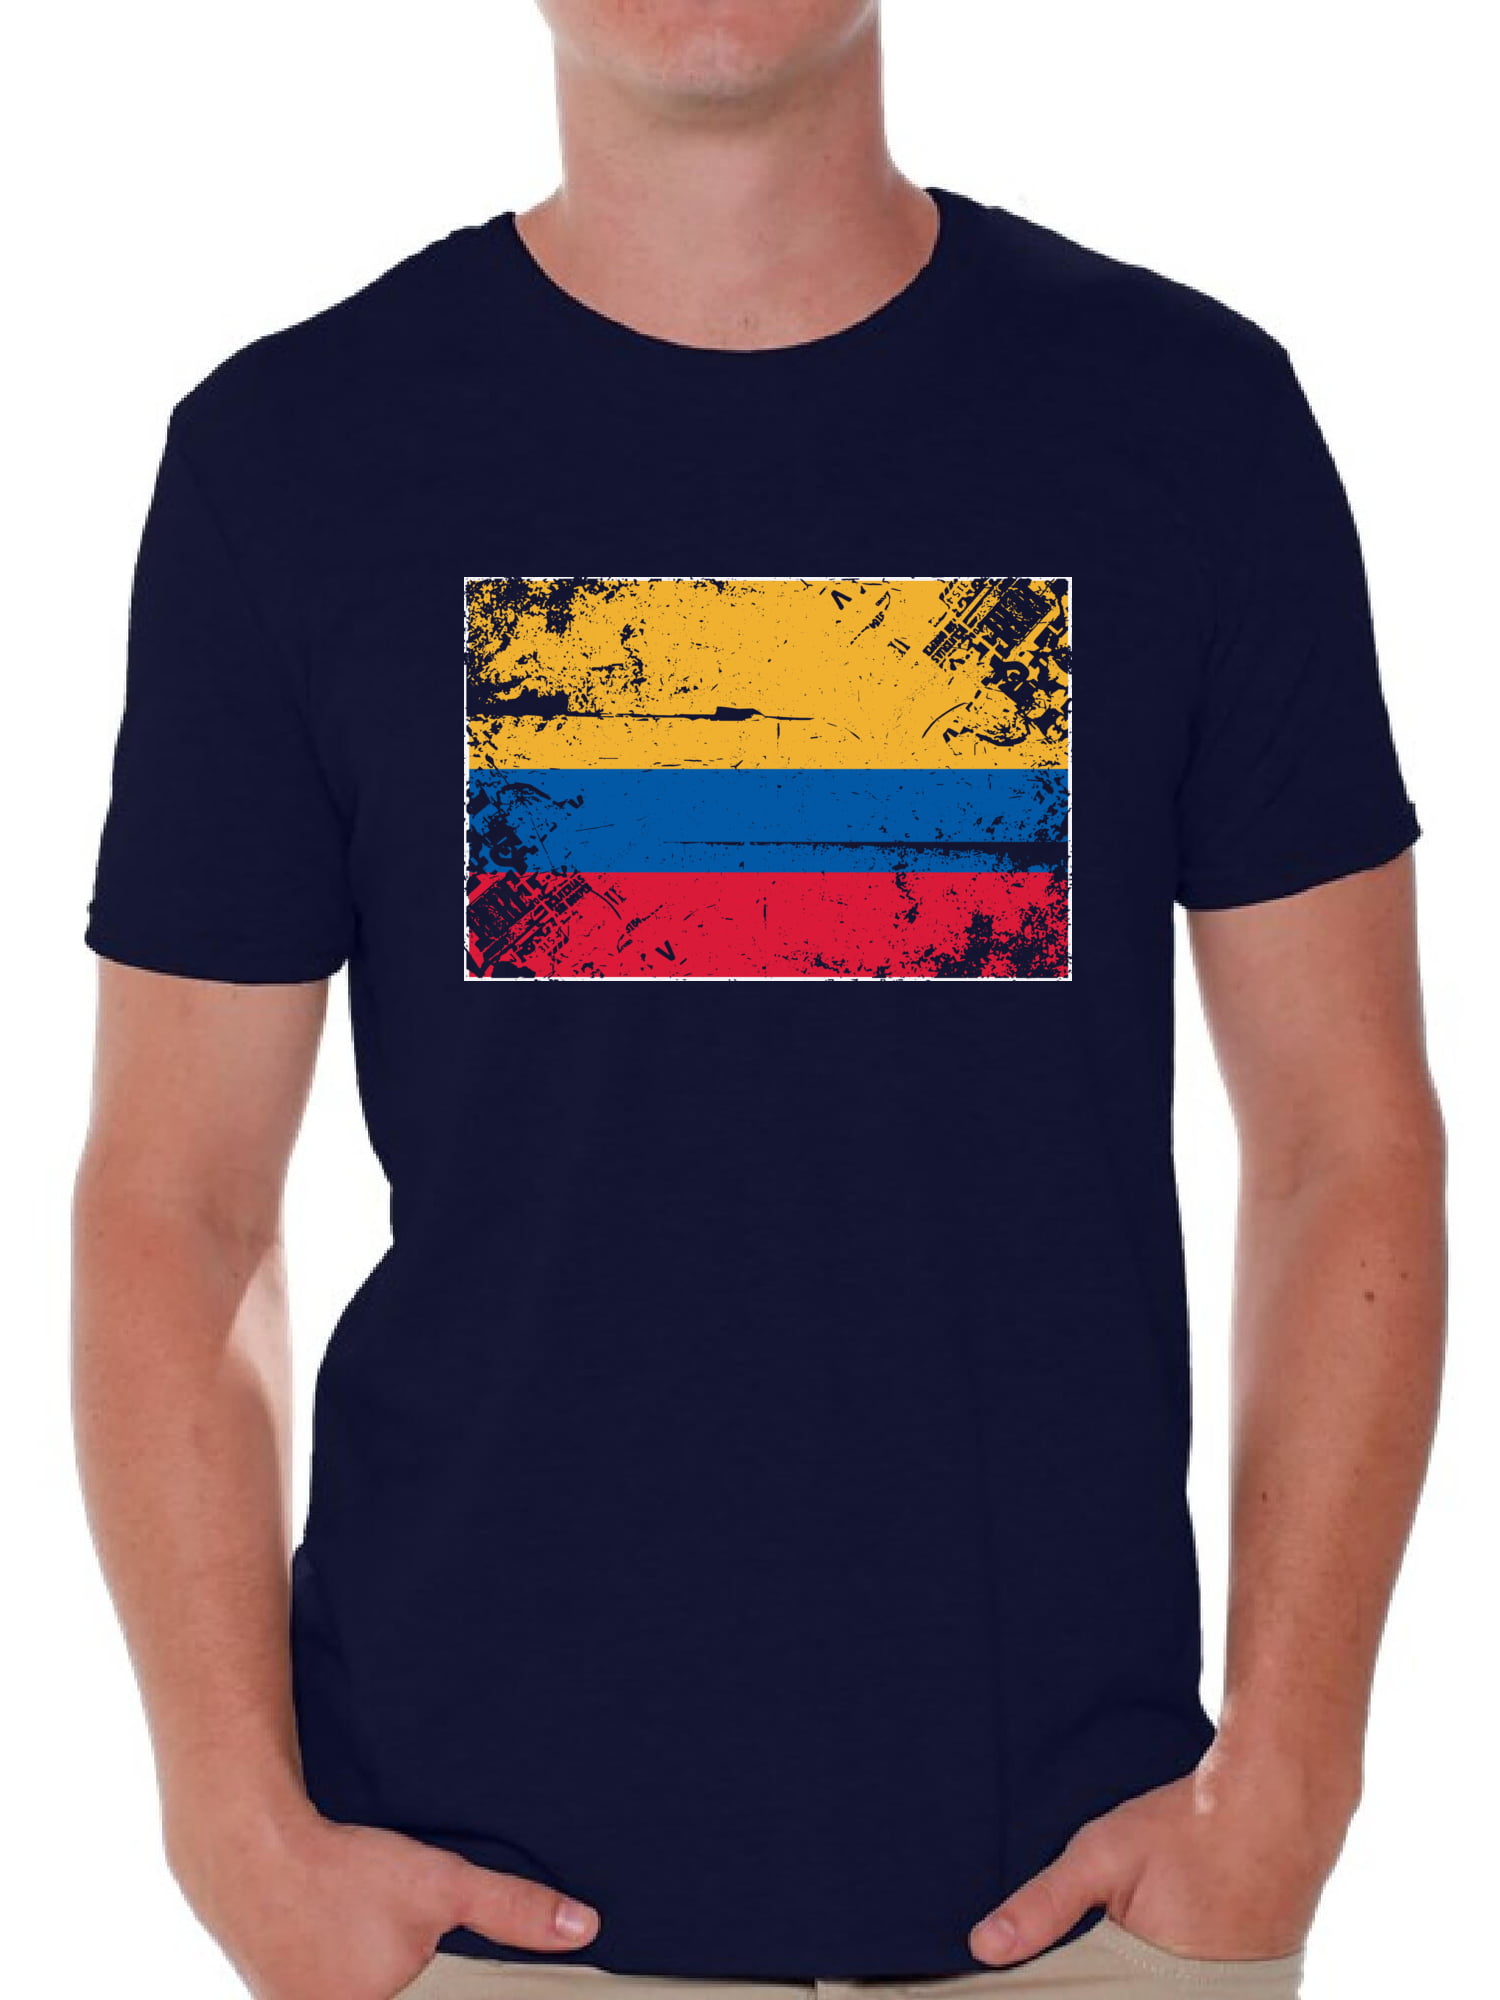 FUNNY COLOMBIA T-SHIRTS GIFTS MENS COOL NOVELTY COLOMBIAN FLAG JOKE RUDE T-SHIRT 